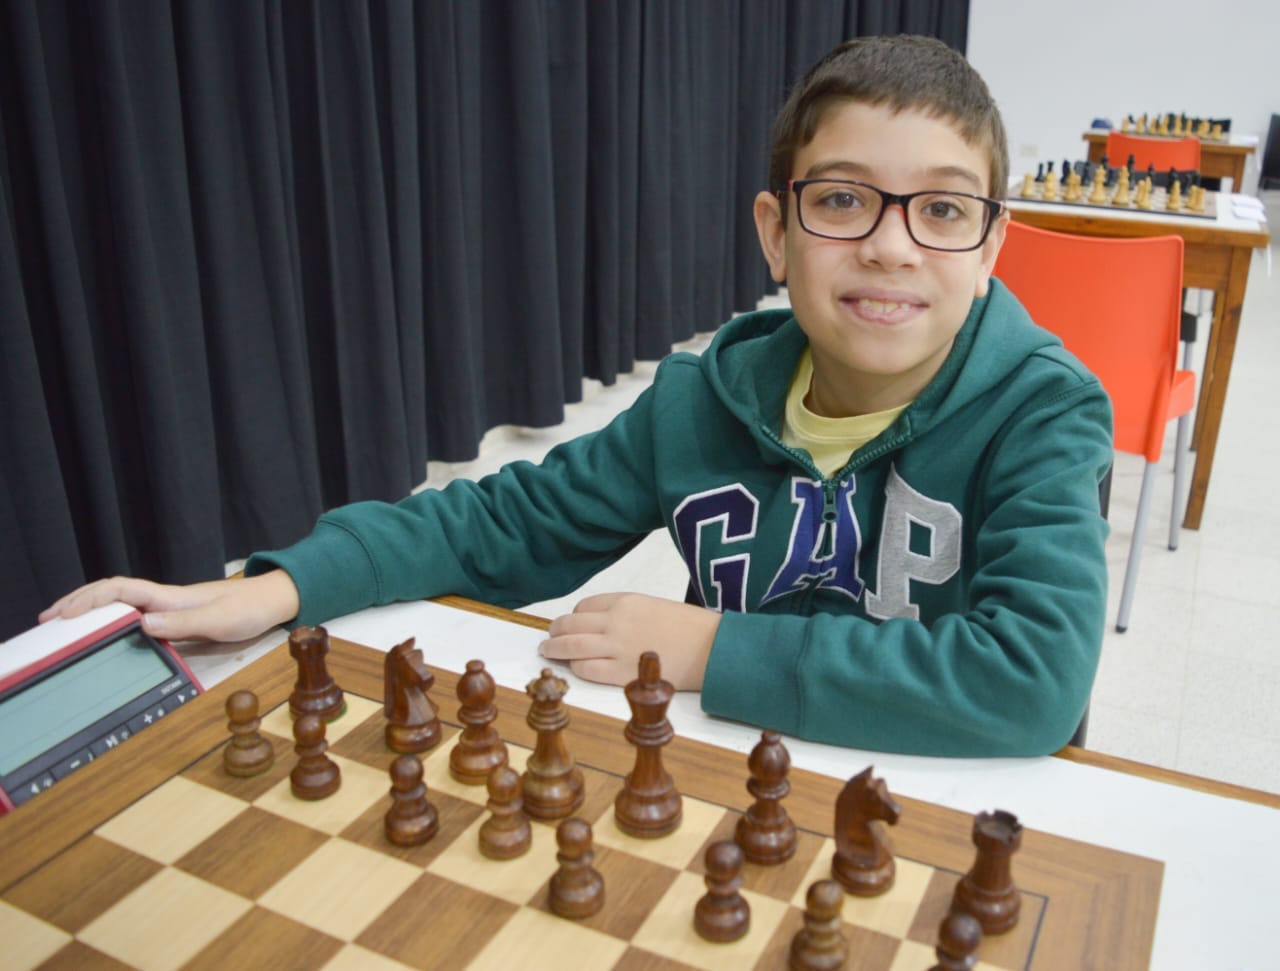 9-Year-Old Dubbed 'Messi Of Chess' Youngest Ever To Score IM Norm - Chess .com